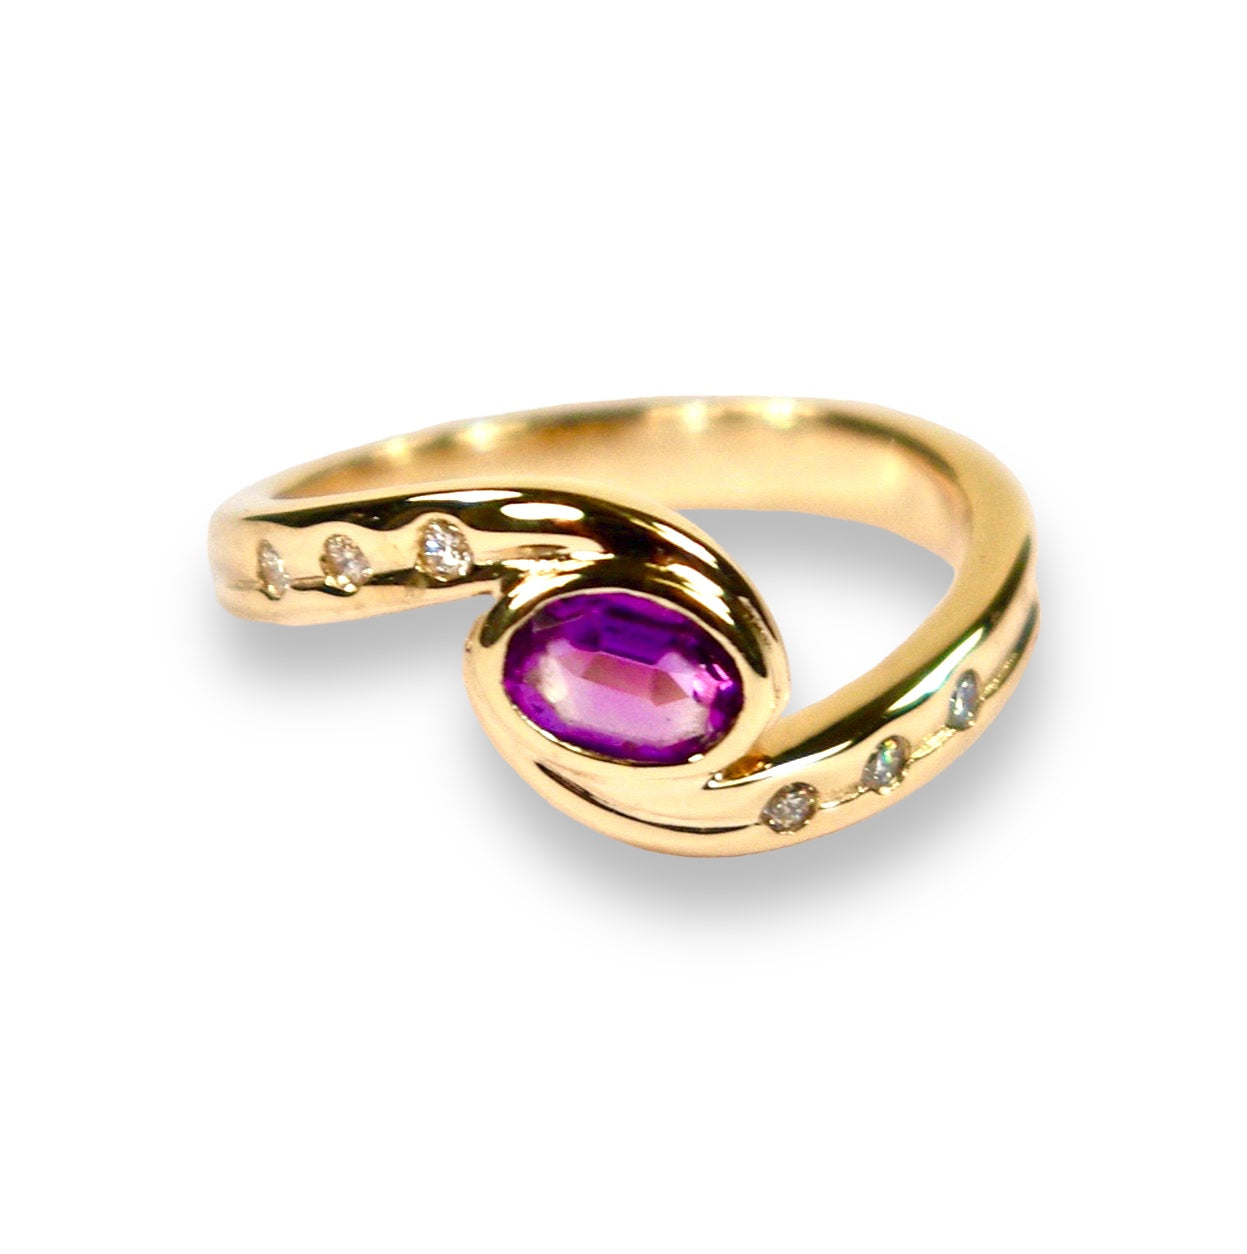 Mavis's Custom Bespoke Curved Twist Ring | In Remodelled 9ct Yellow Gold | Set With Her Own Amethyst And Diamonds